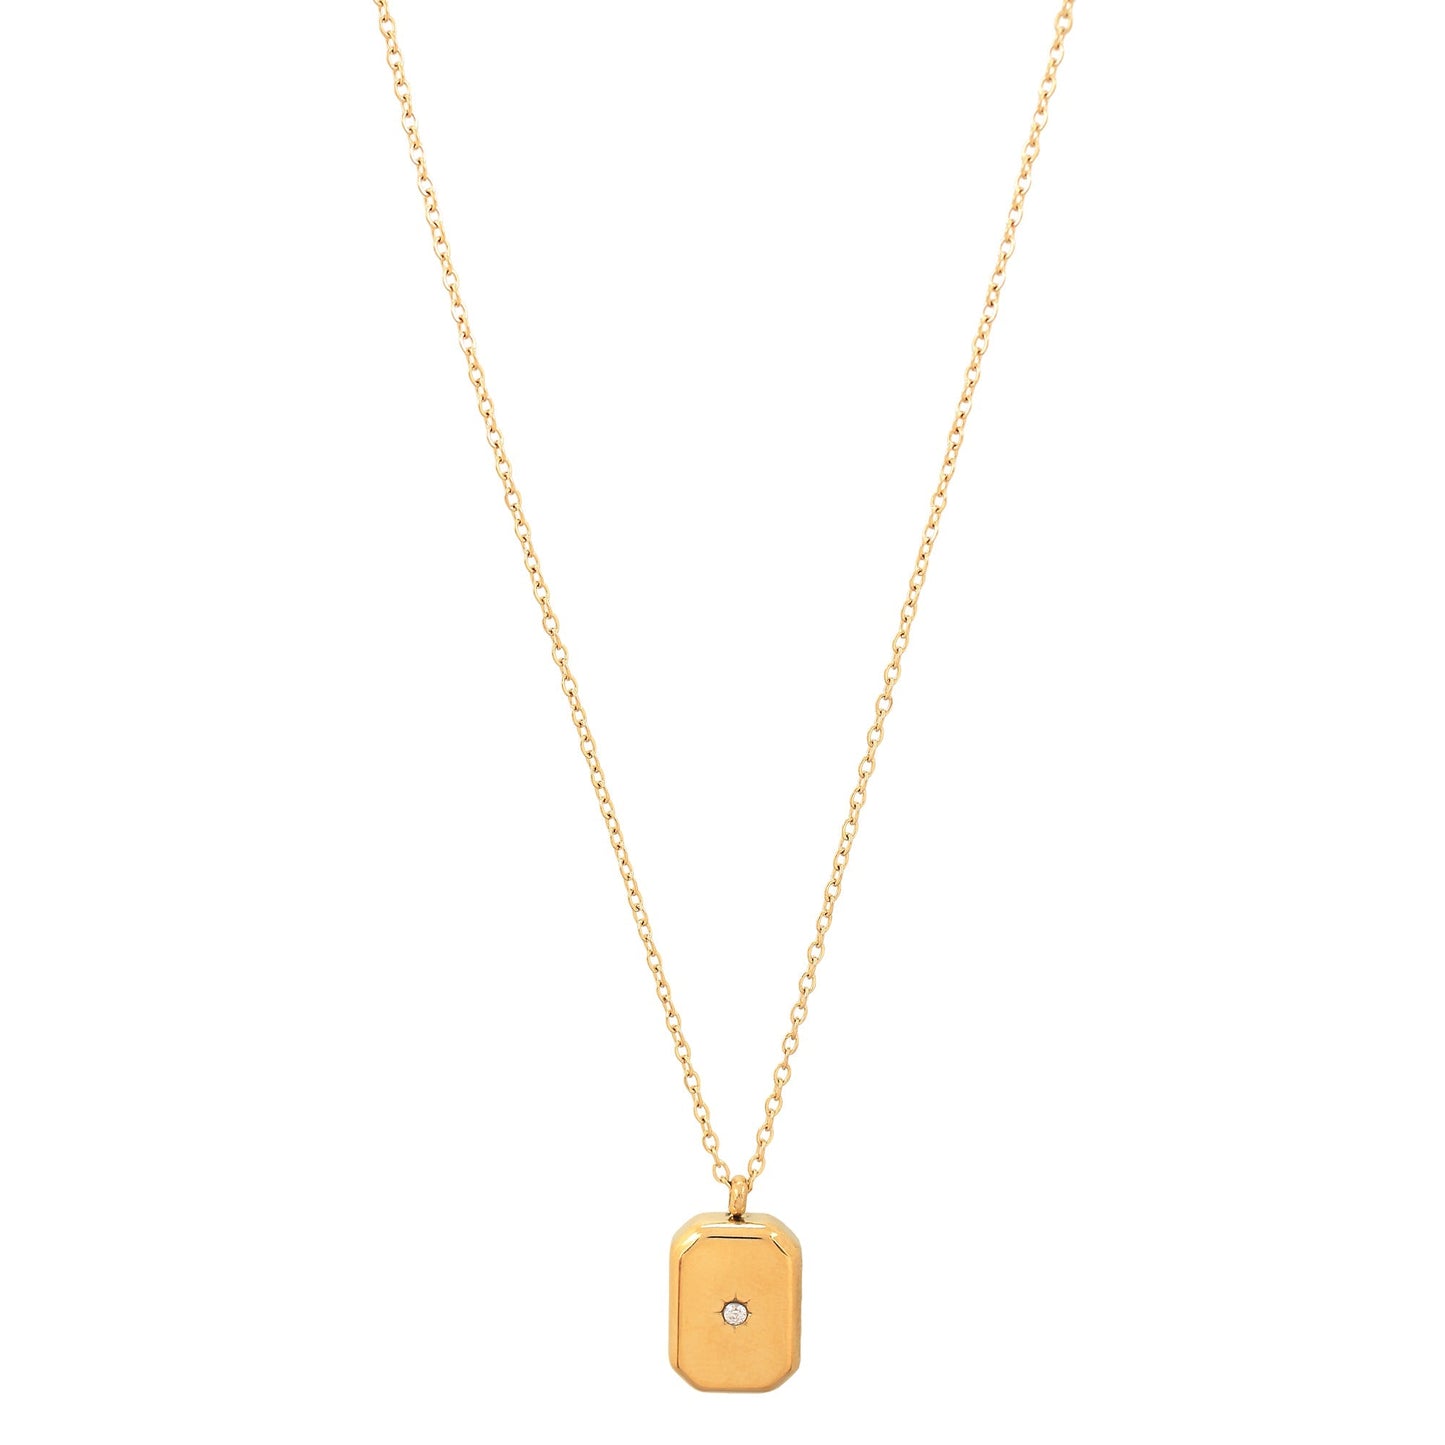 The Rectangle Necklace